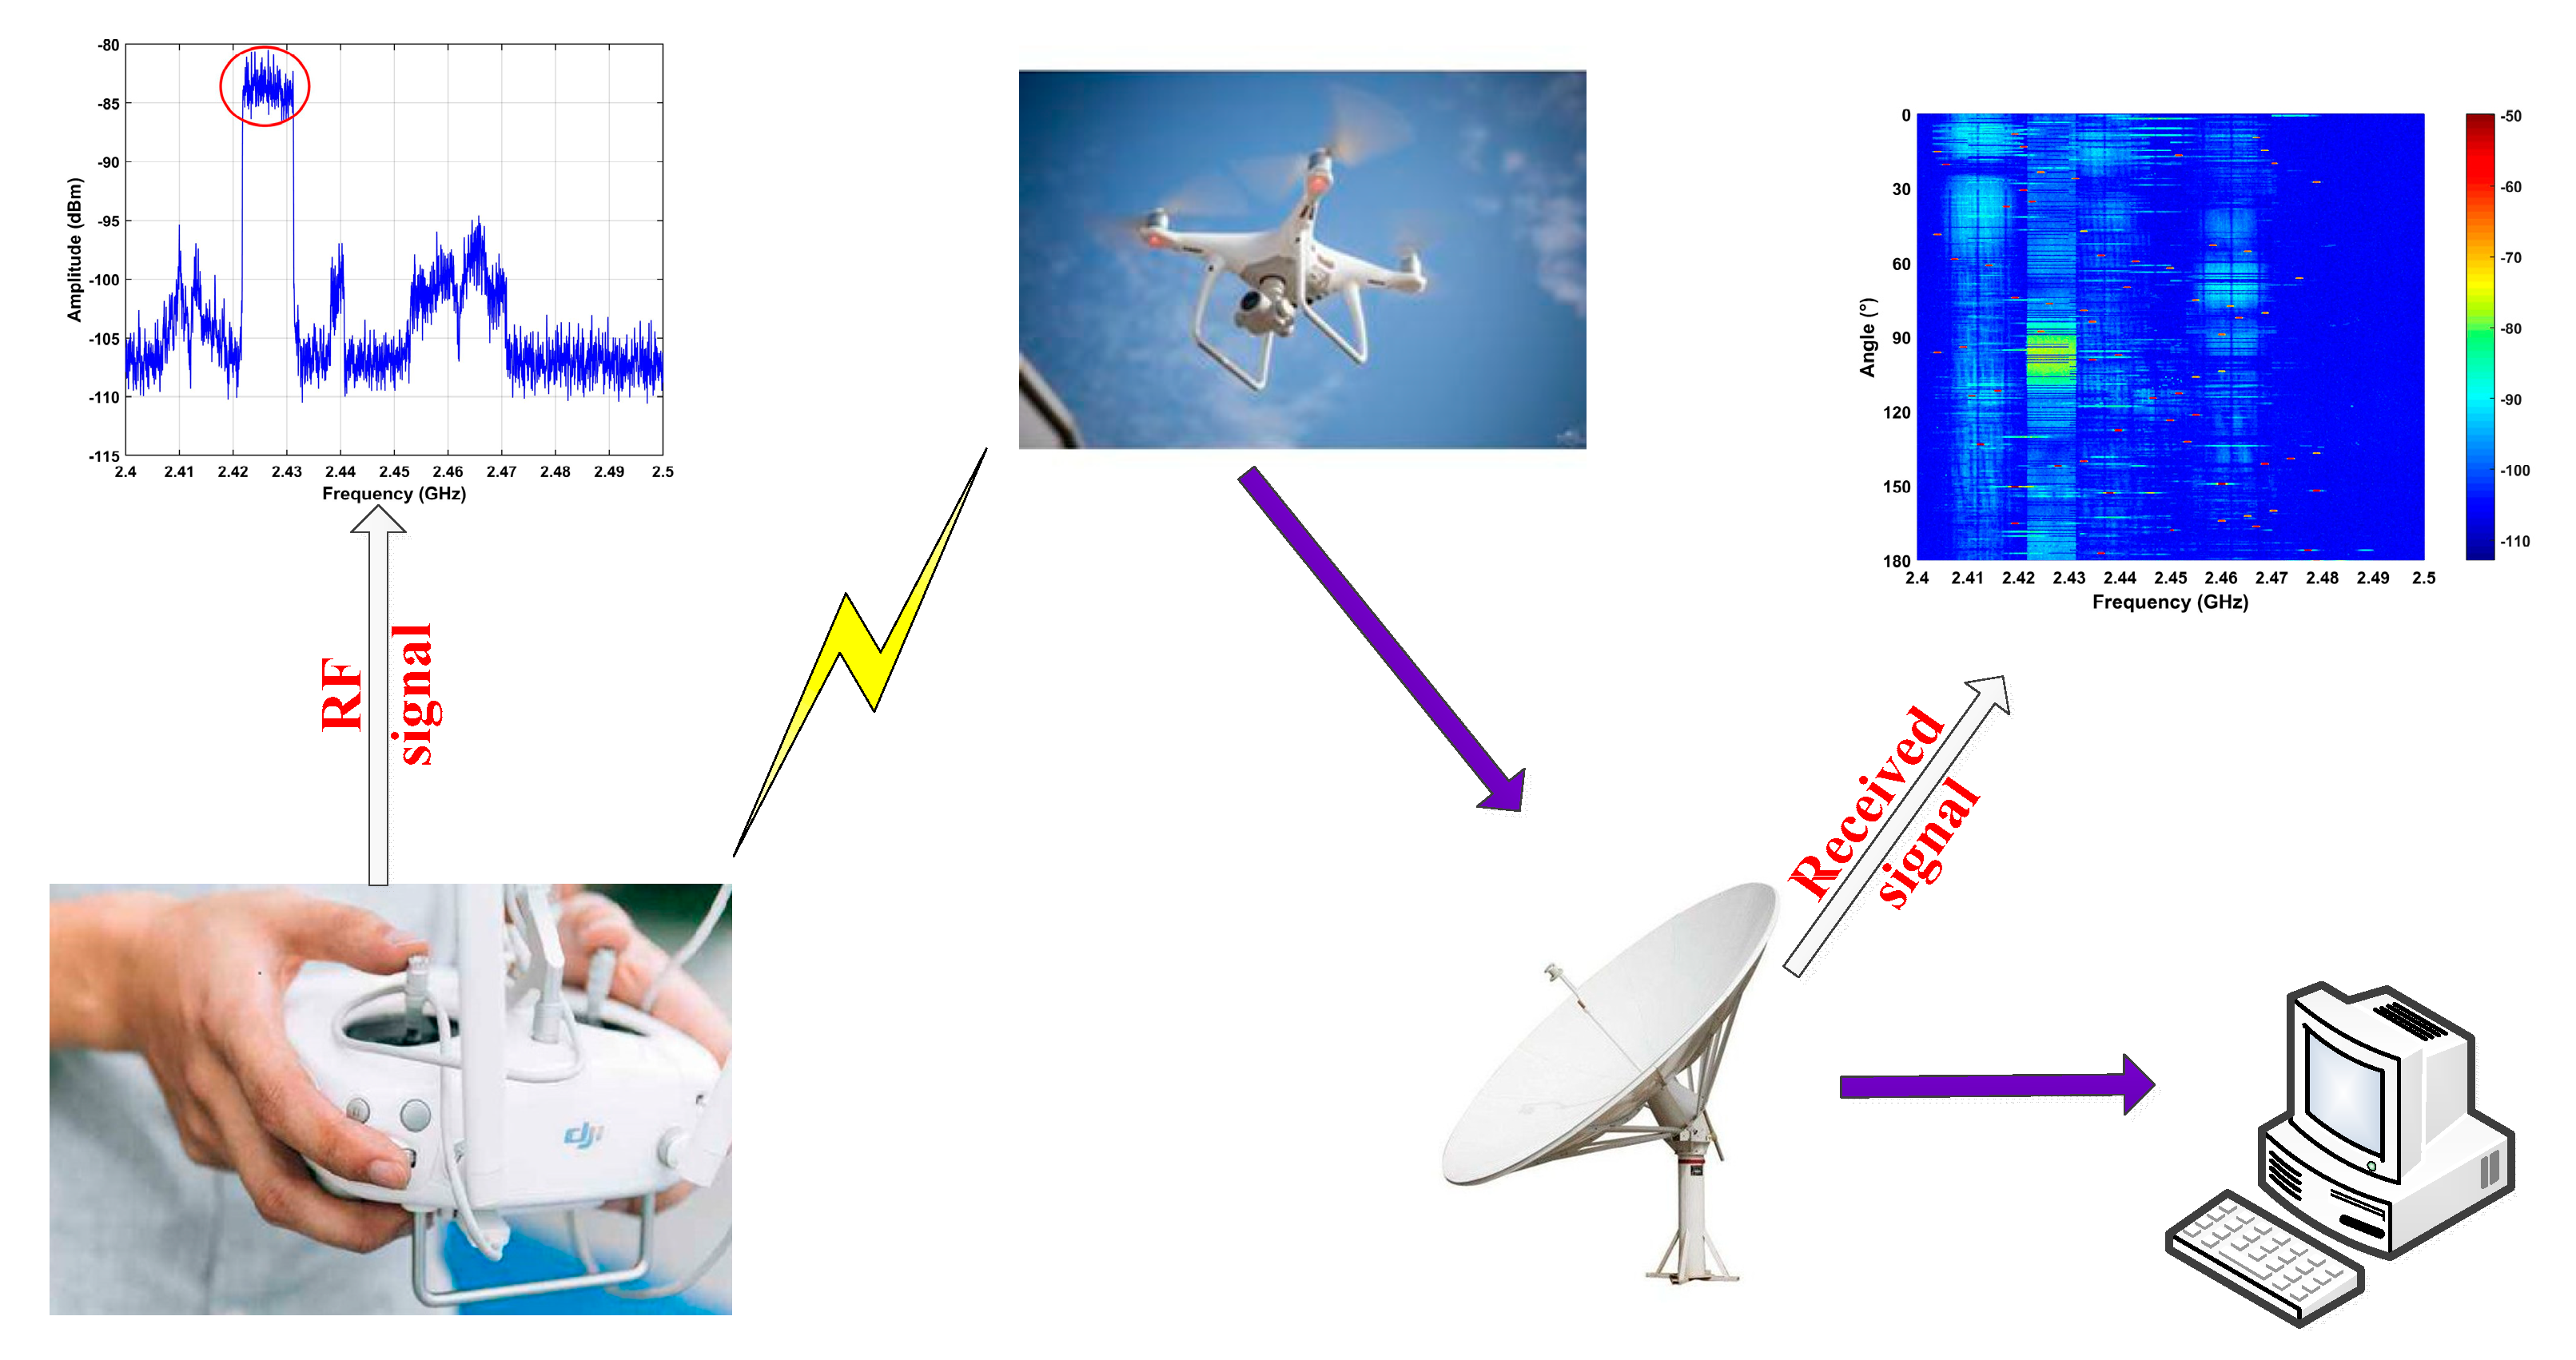 Sensors | Free Full-Text | An Improved Unauthorized Unmanned Aerial Vehicle  Detection Algorithm Using Radiofrequency-Based Statistical Fingerprint  Analysis